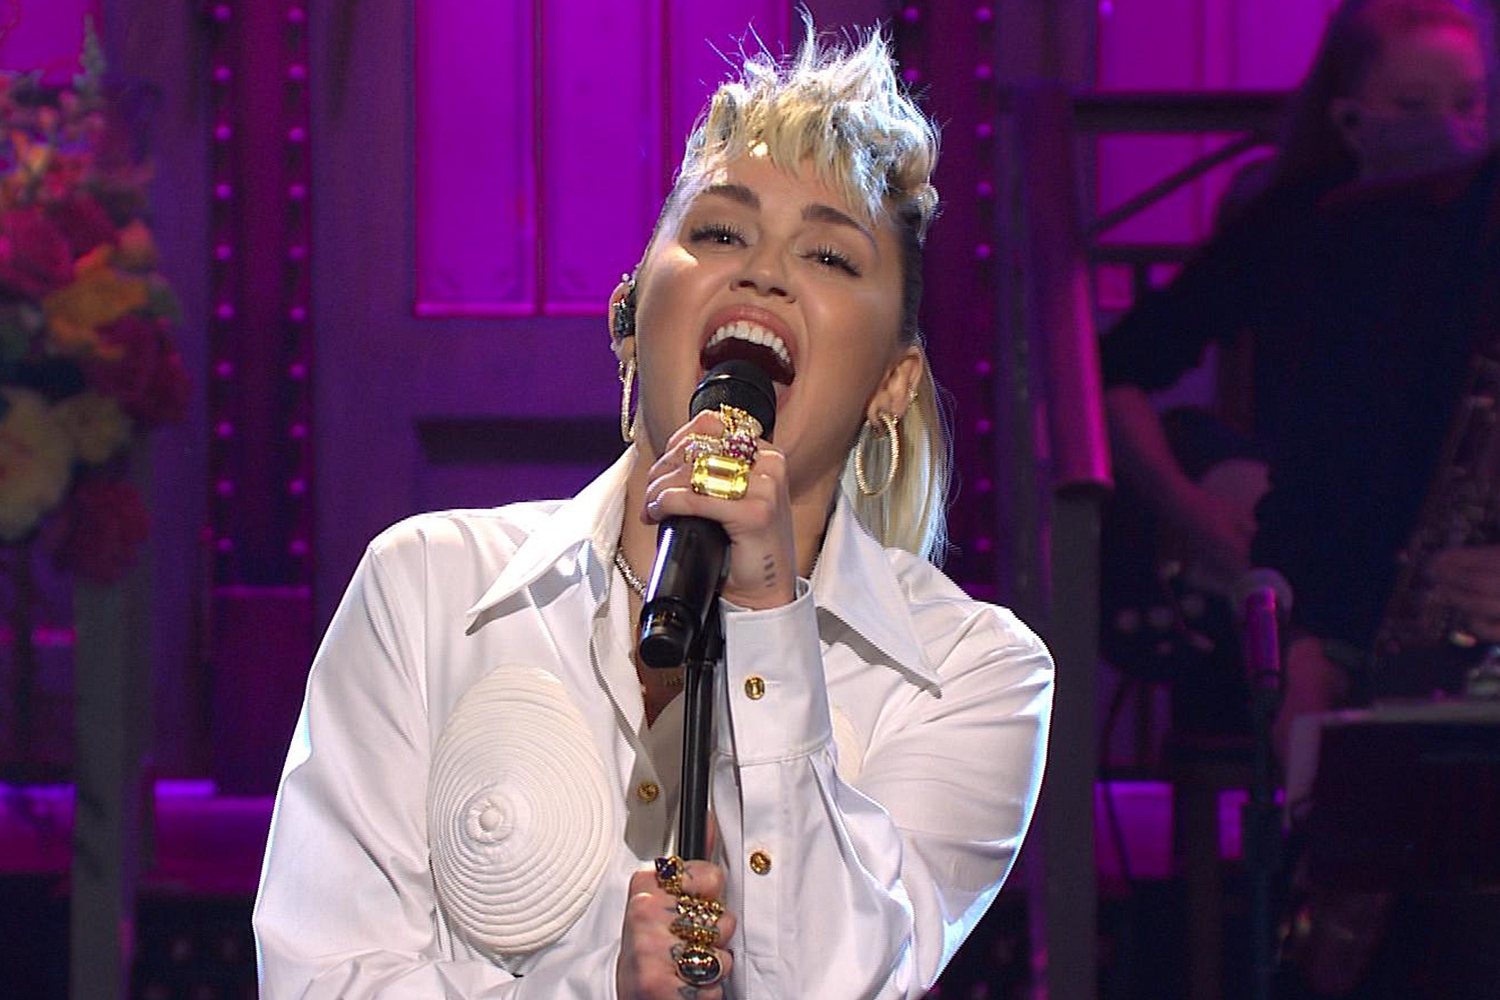 Miley Cyrus covers Dolly Parton’s ‘Light Of A Clear Blue Morning’